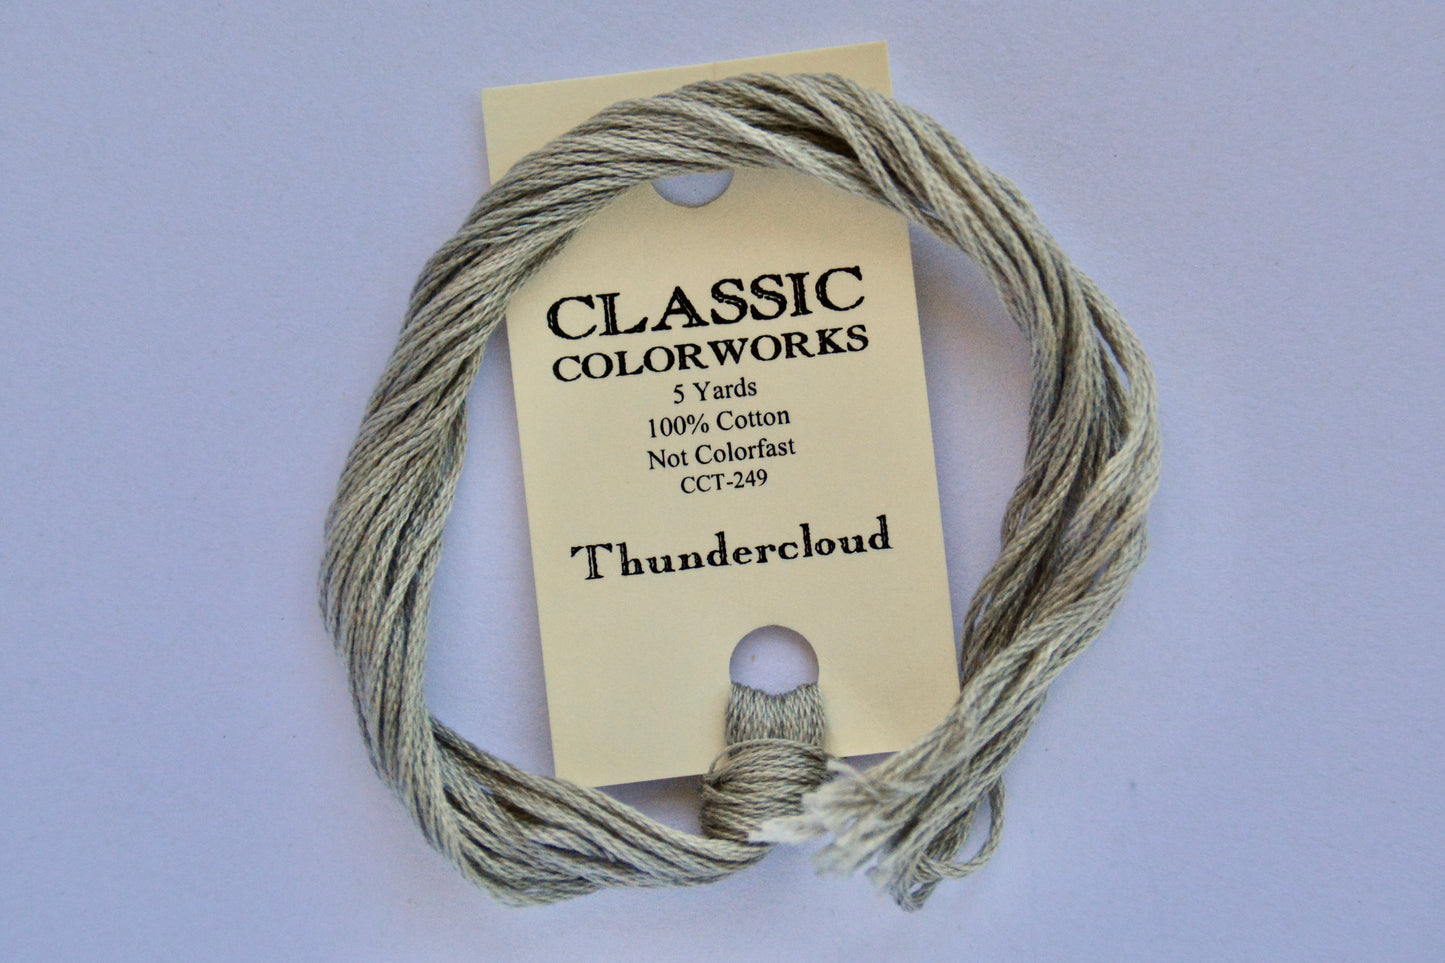 Classic Colorworks thundercloud CCT-249